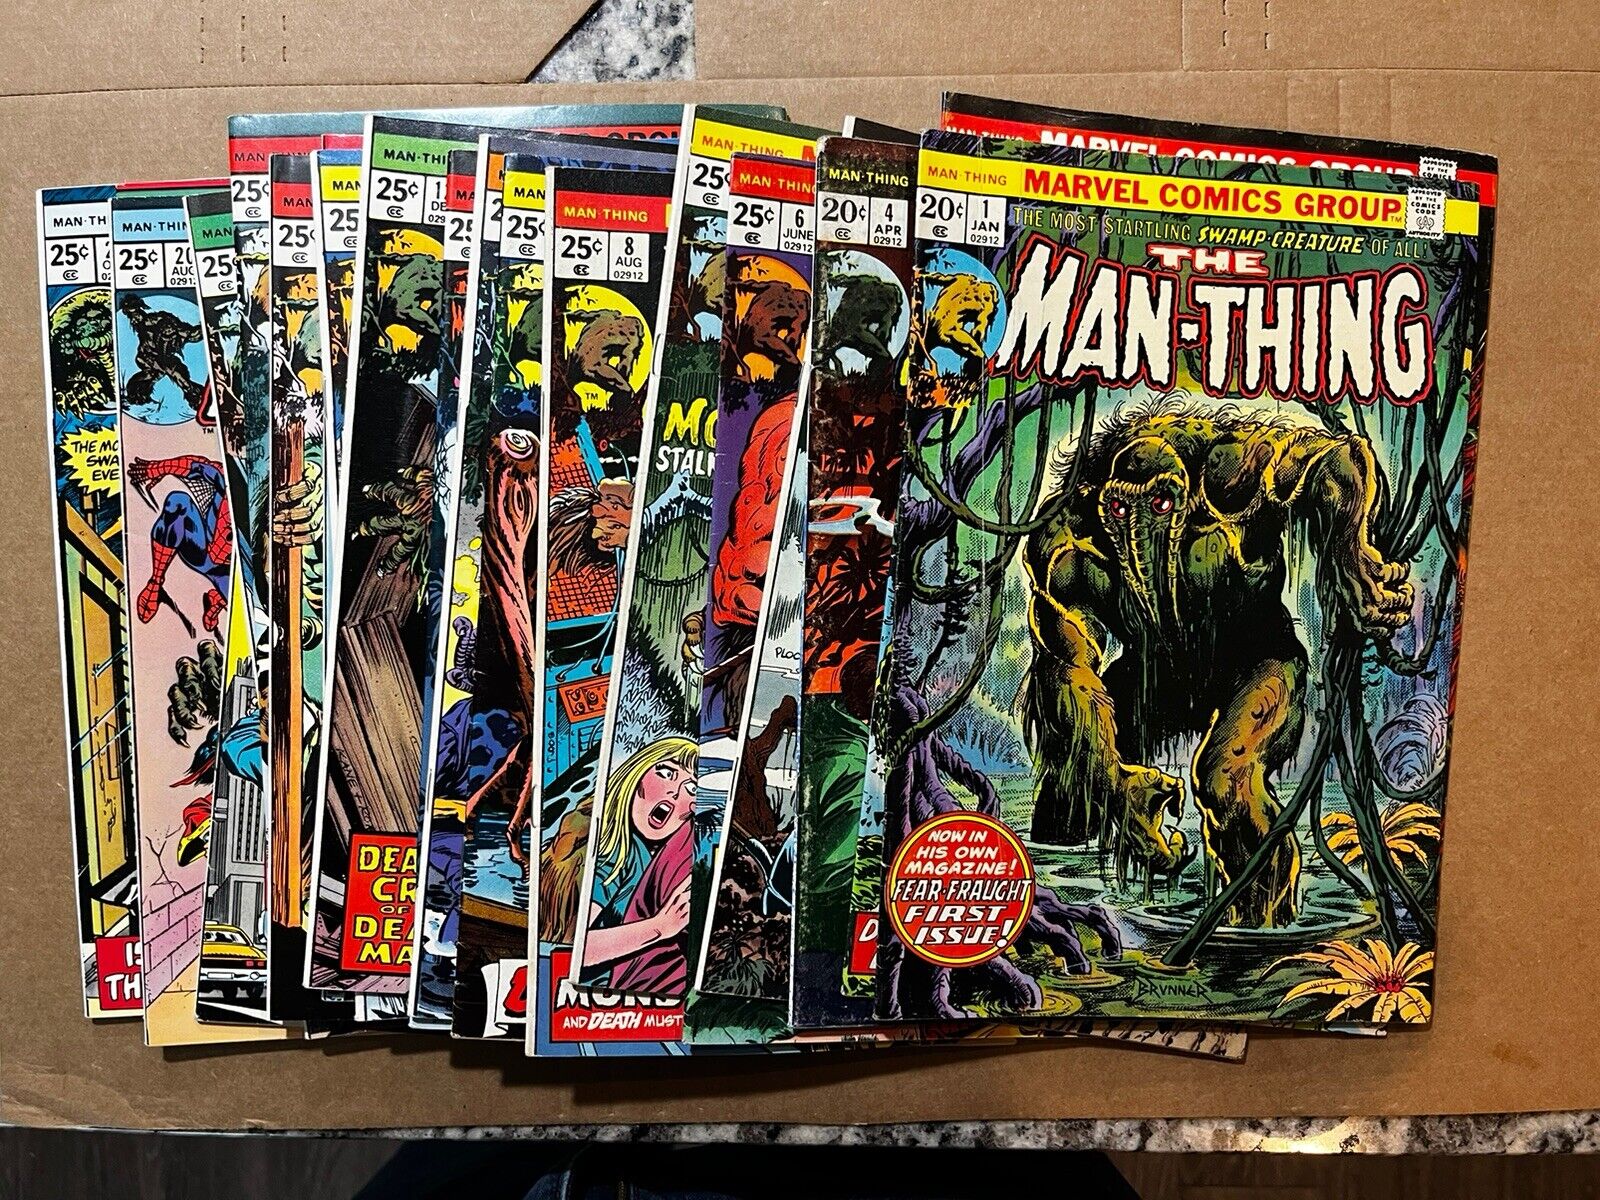 MAN-THING (1974) LOT, COMPLETE SERIES S1-22, VF VERY FINE Average Grade